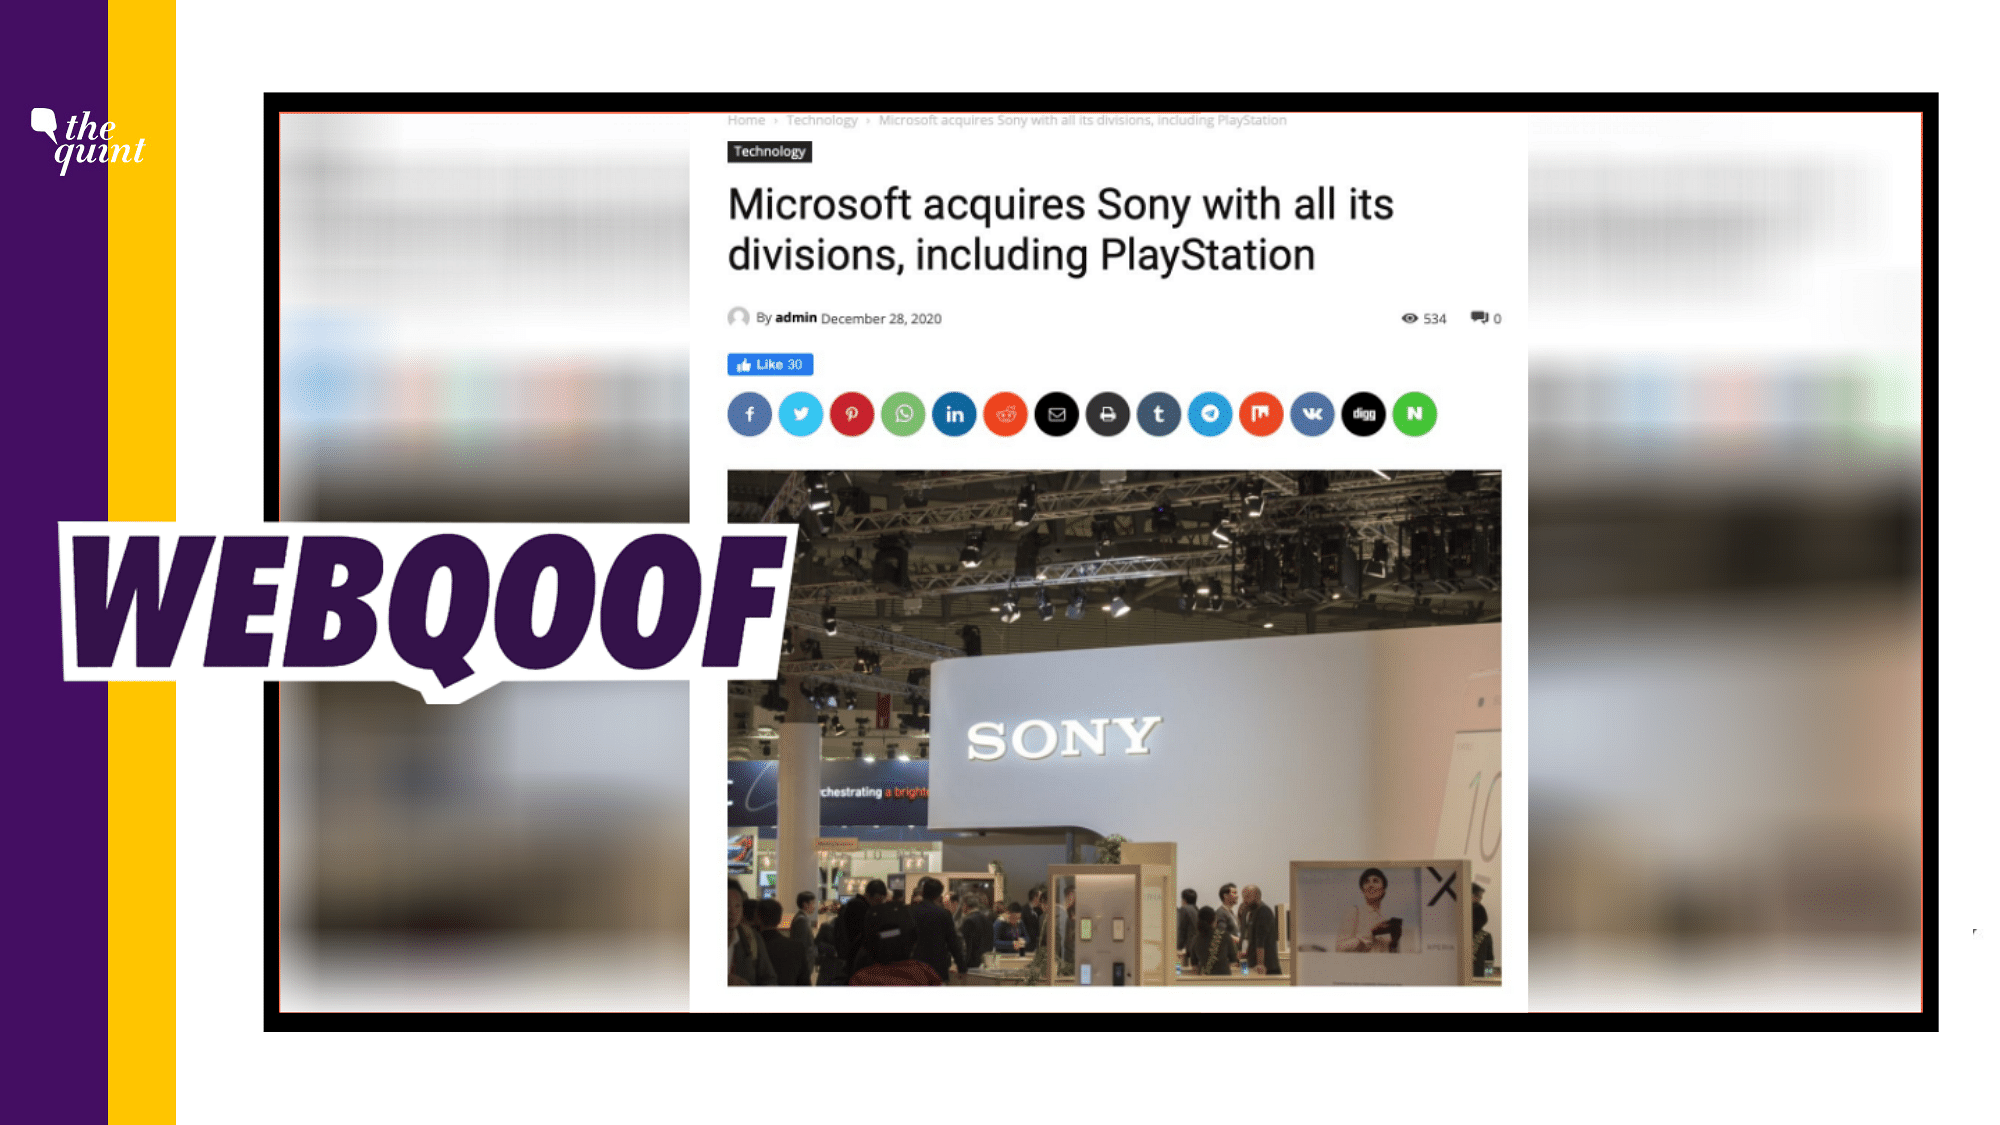 Fact-Check on Microsoft acquiring Sony | A viral post has gone viral that falsely claims that Microsoft has acquired Sony, with all its divisions, including PlayStation.&nbsp;